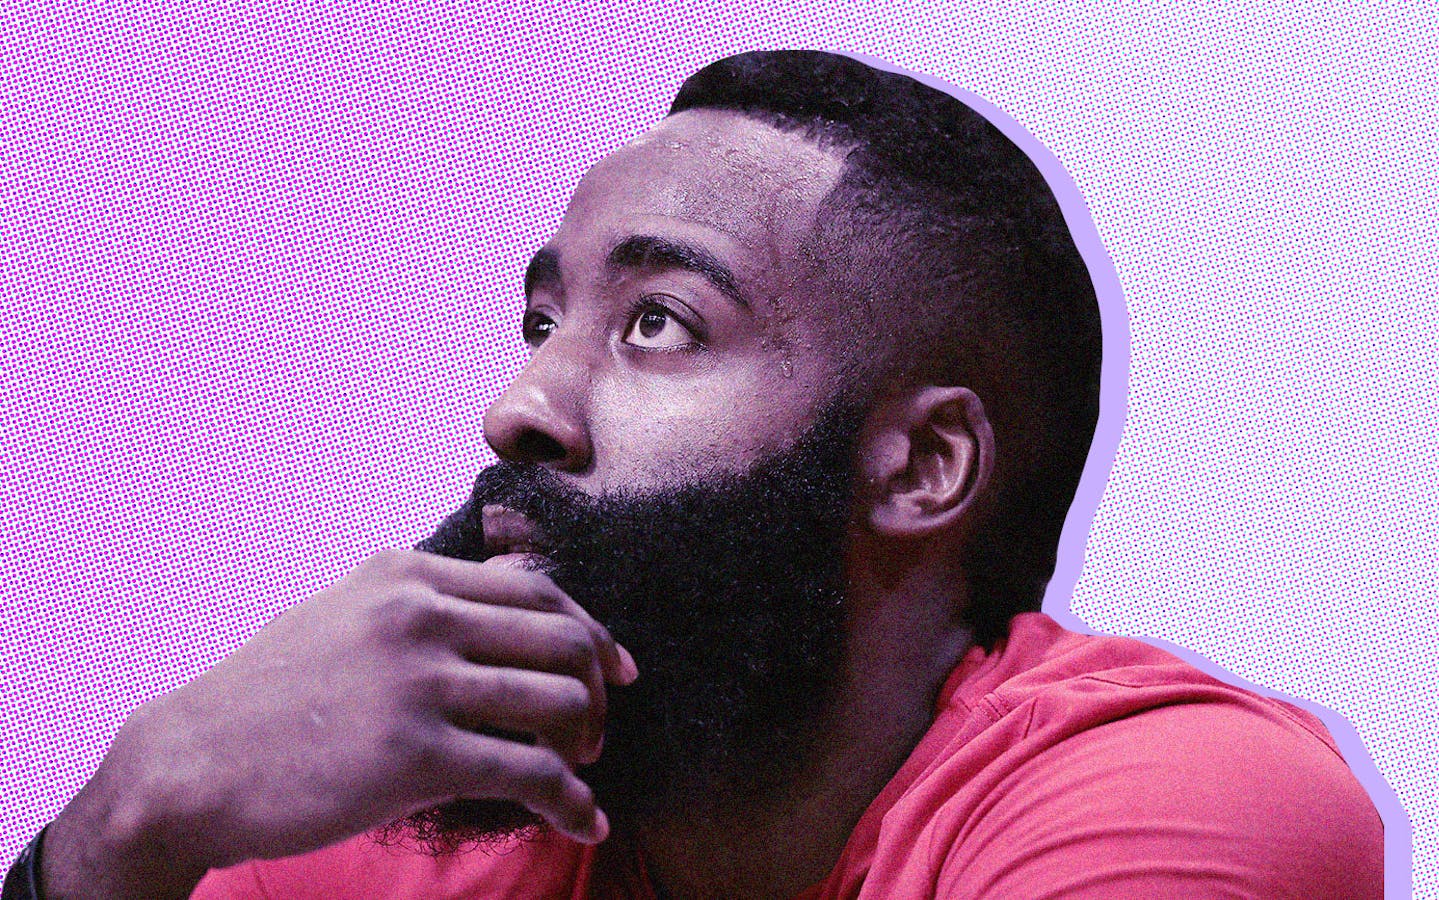 James Harden Sixers Digital Art by Bui Chinh - Pixels